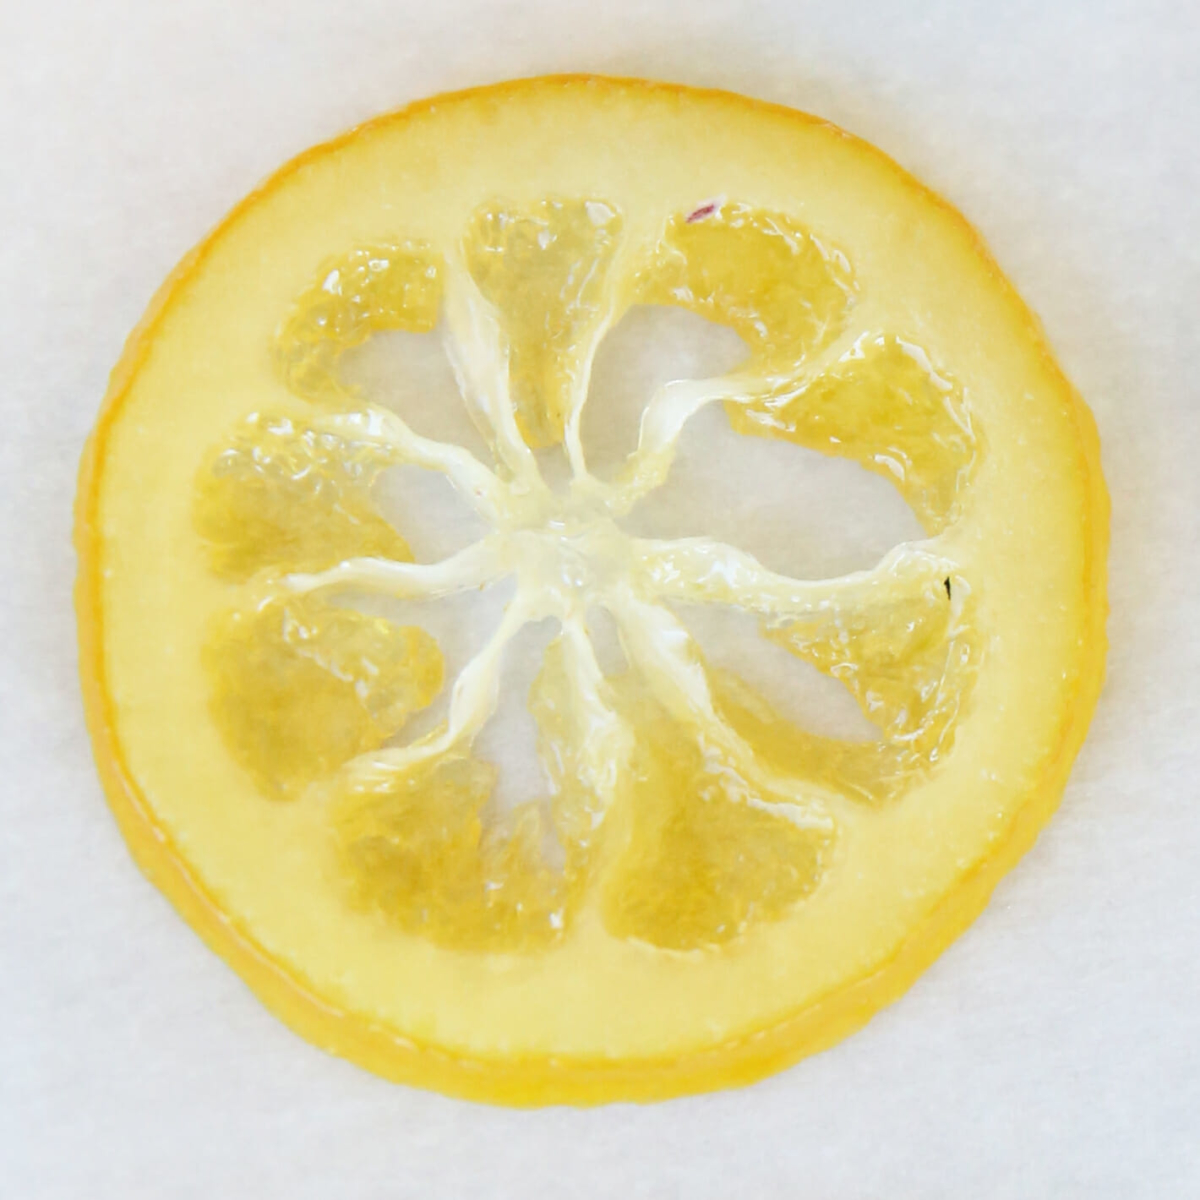 How to make Candied Lemon Slices